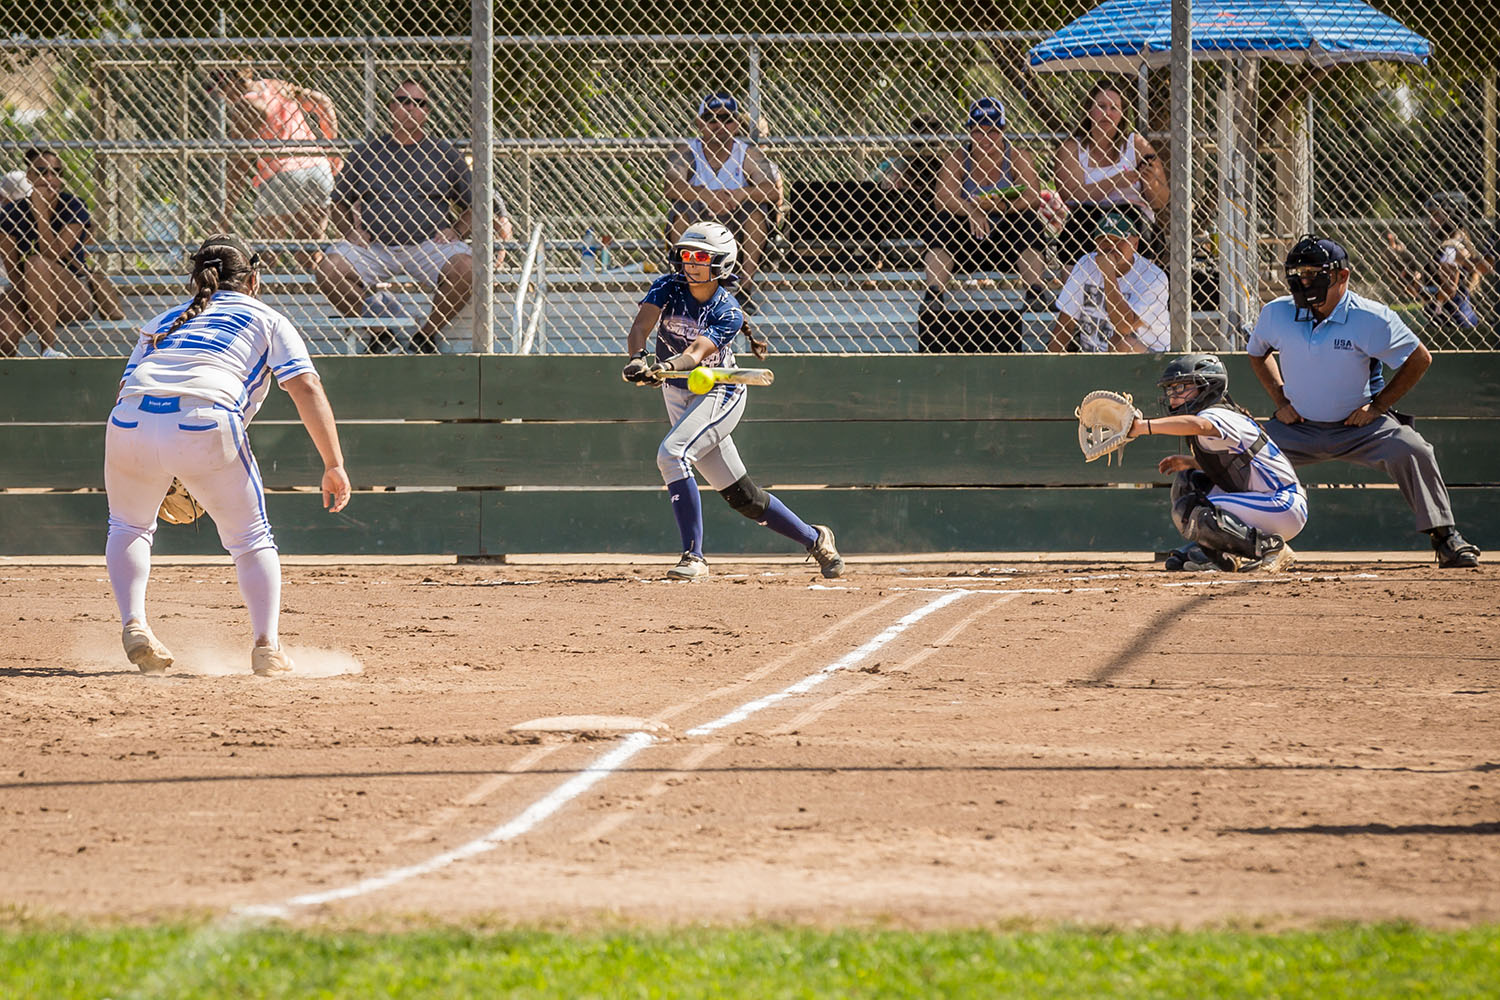 Softball in Placer County